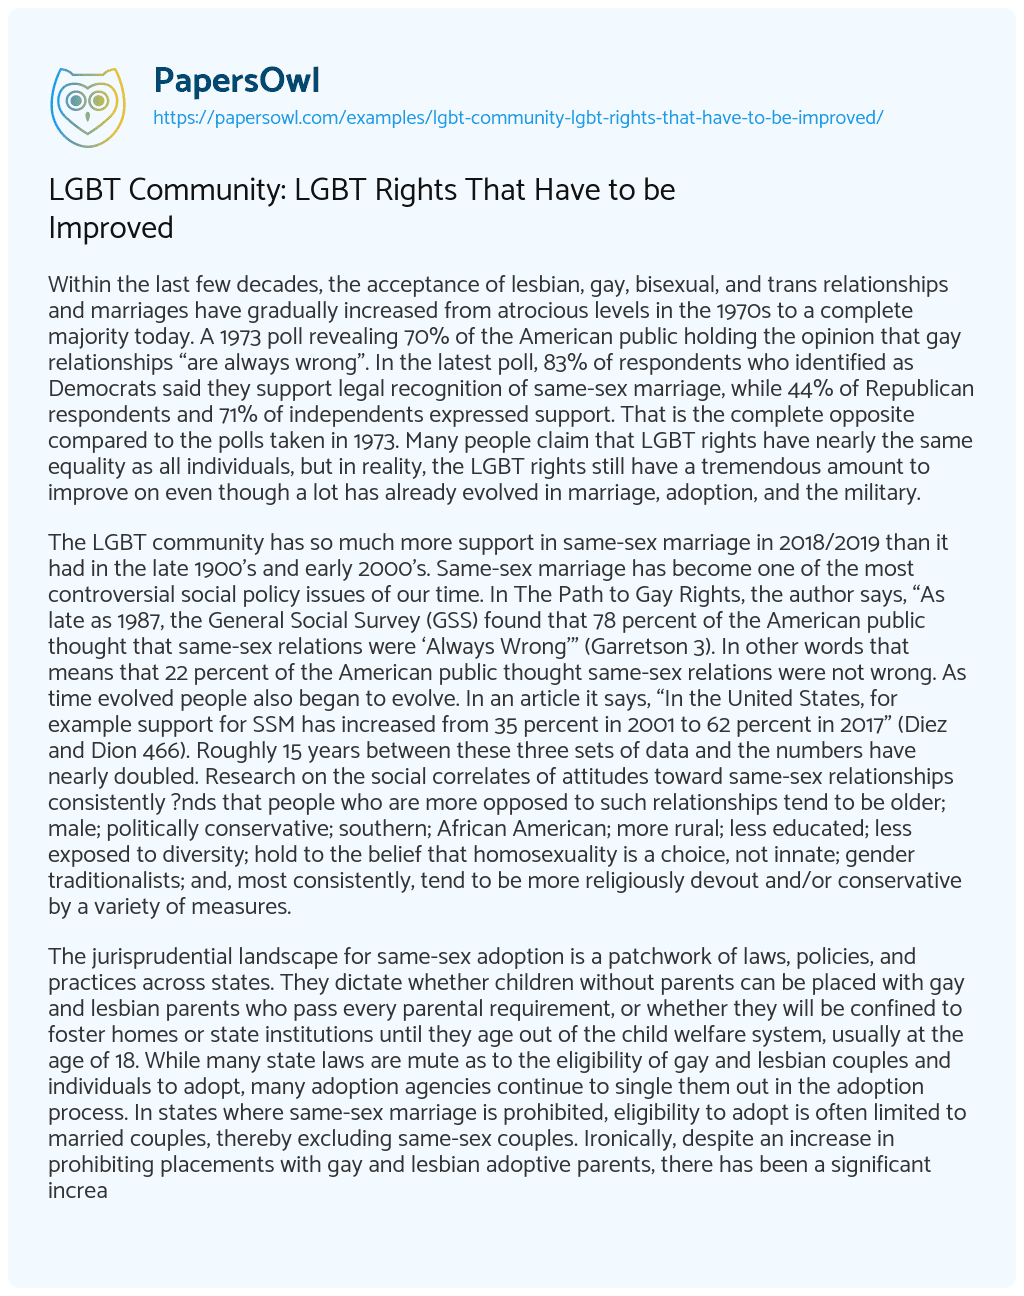 Essay on LGBT Community: LGBT Rights that have to be Improved